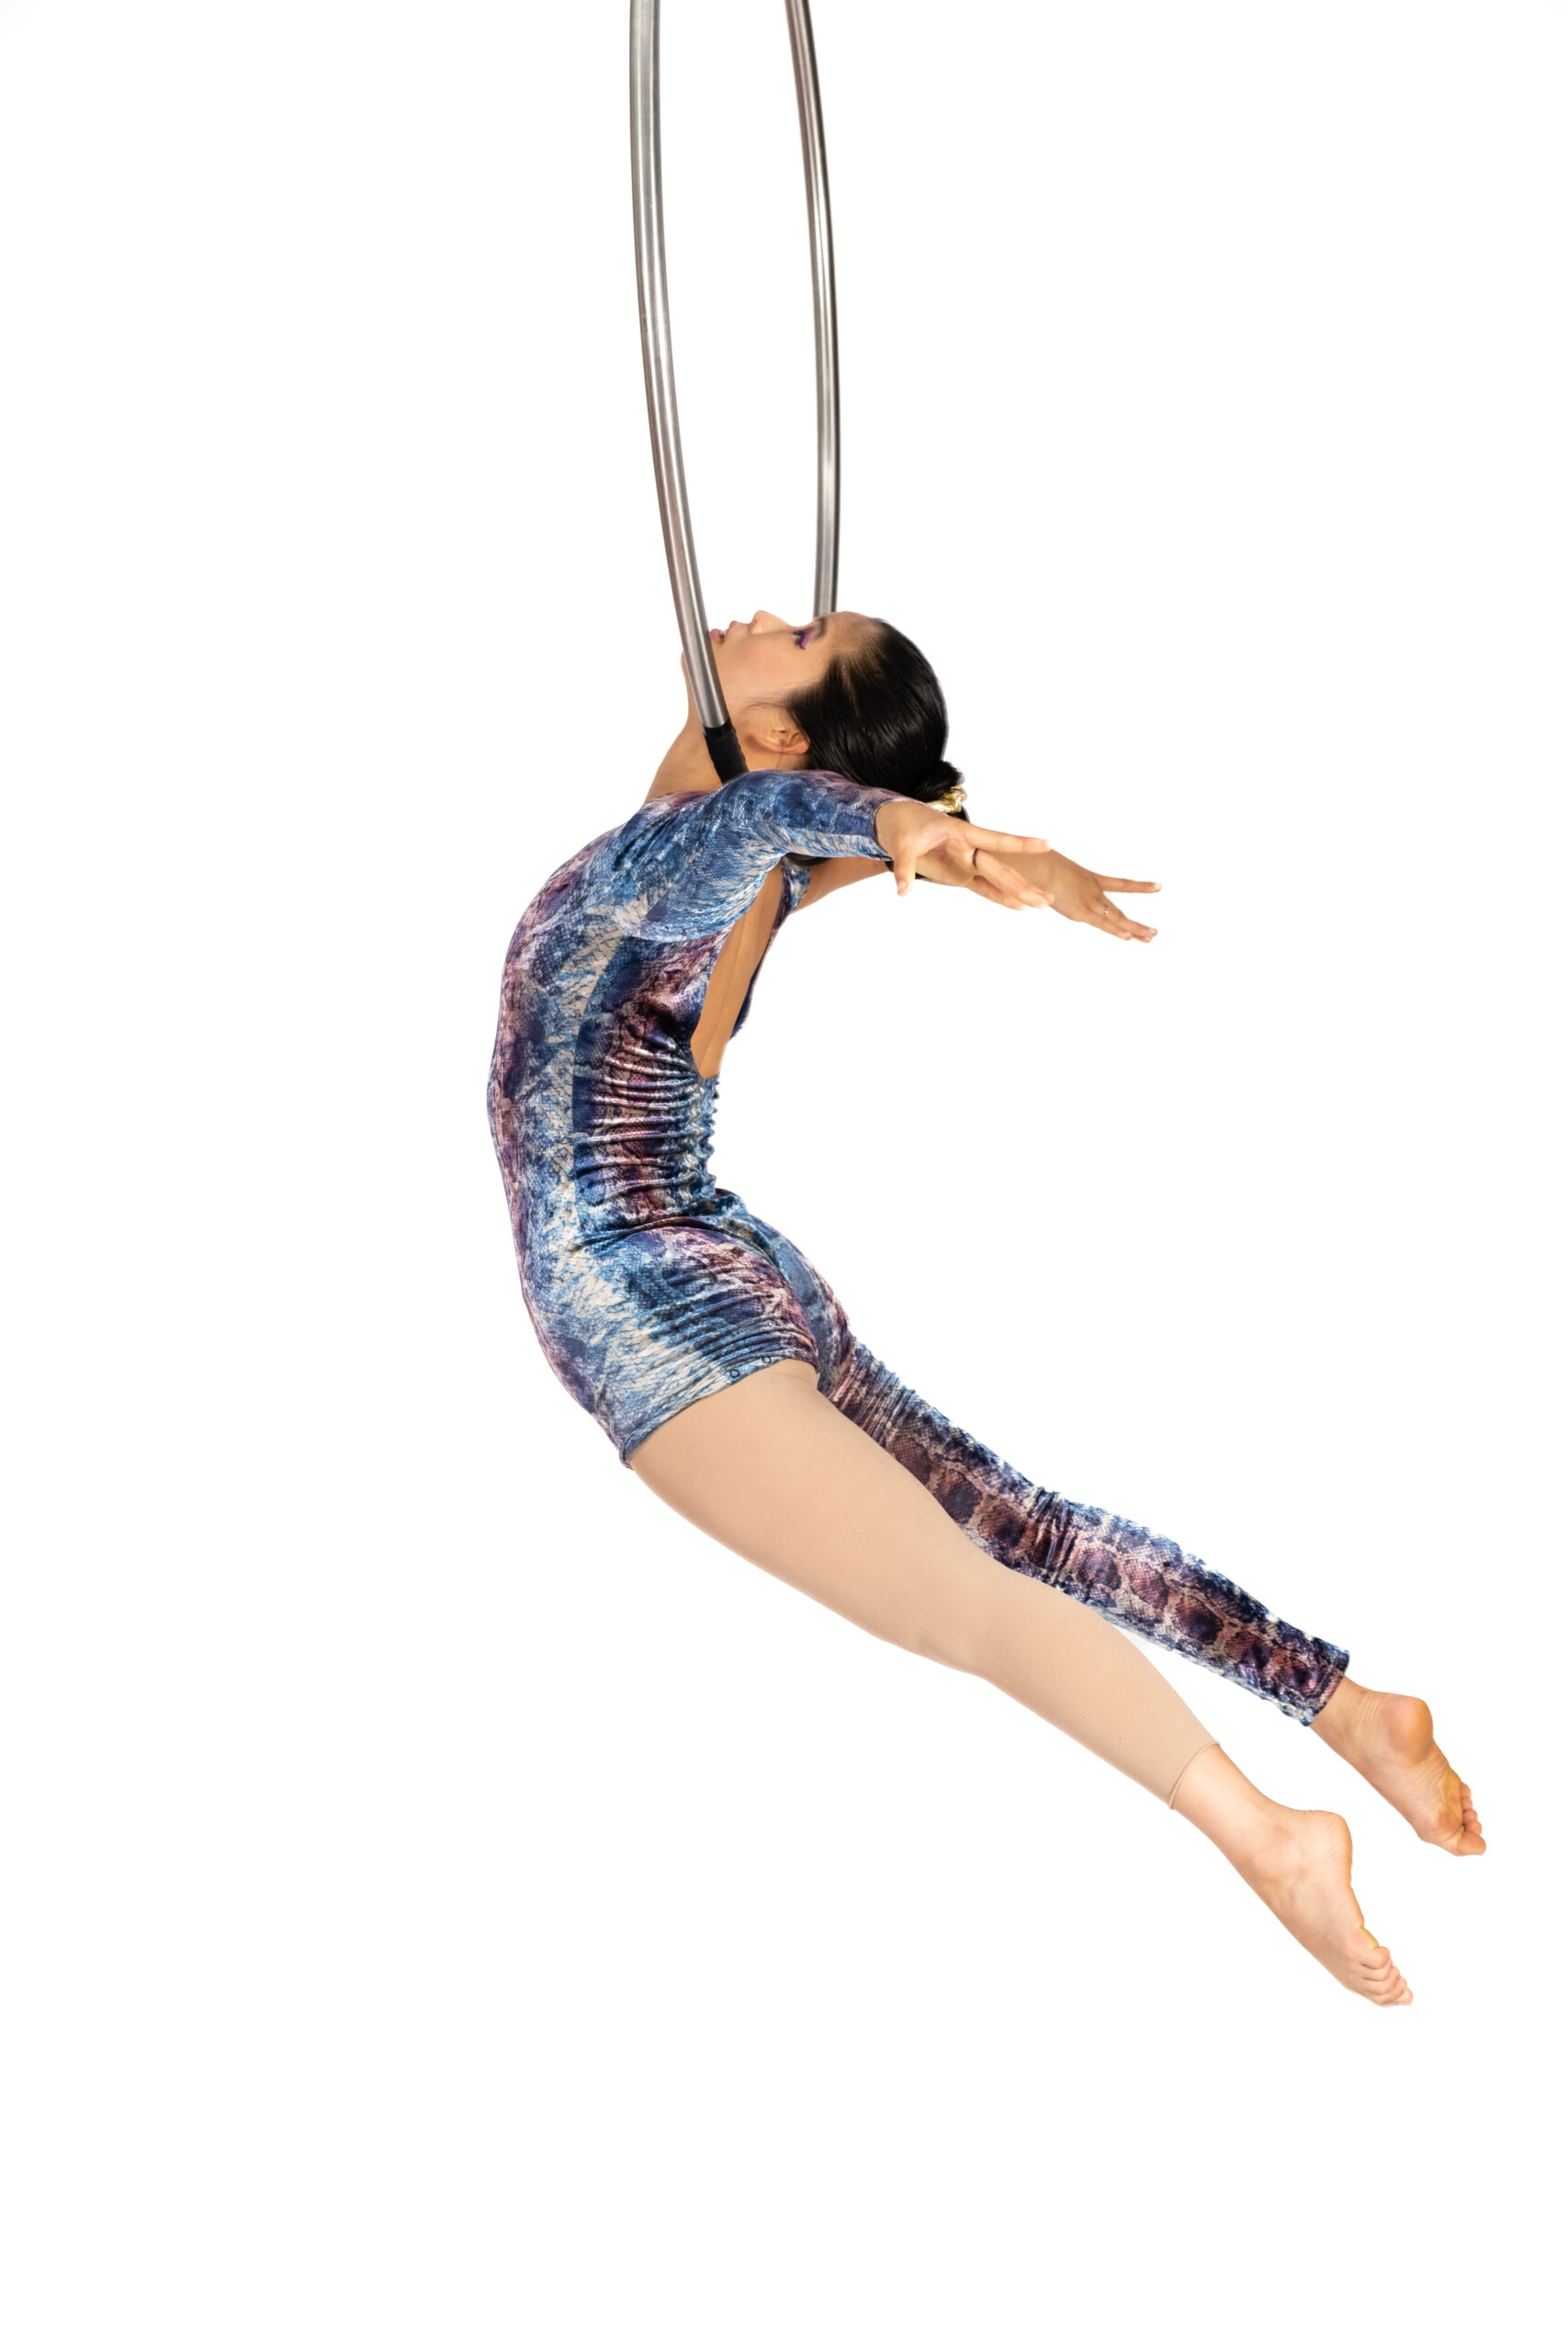 An advanced aerial student performs a neck hang from the Lyra at Roundabout Circus Studio in Wyoming